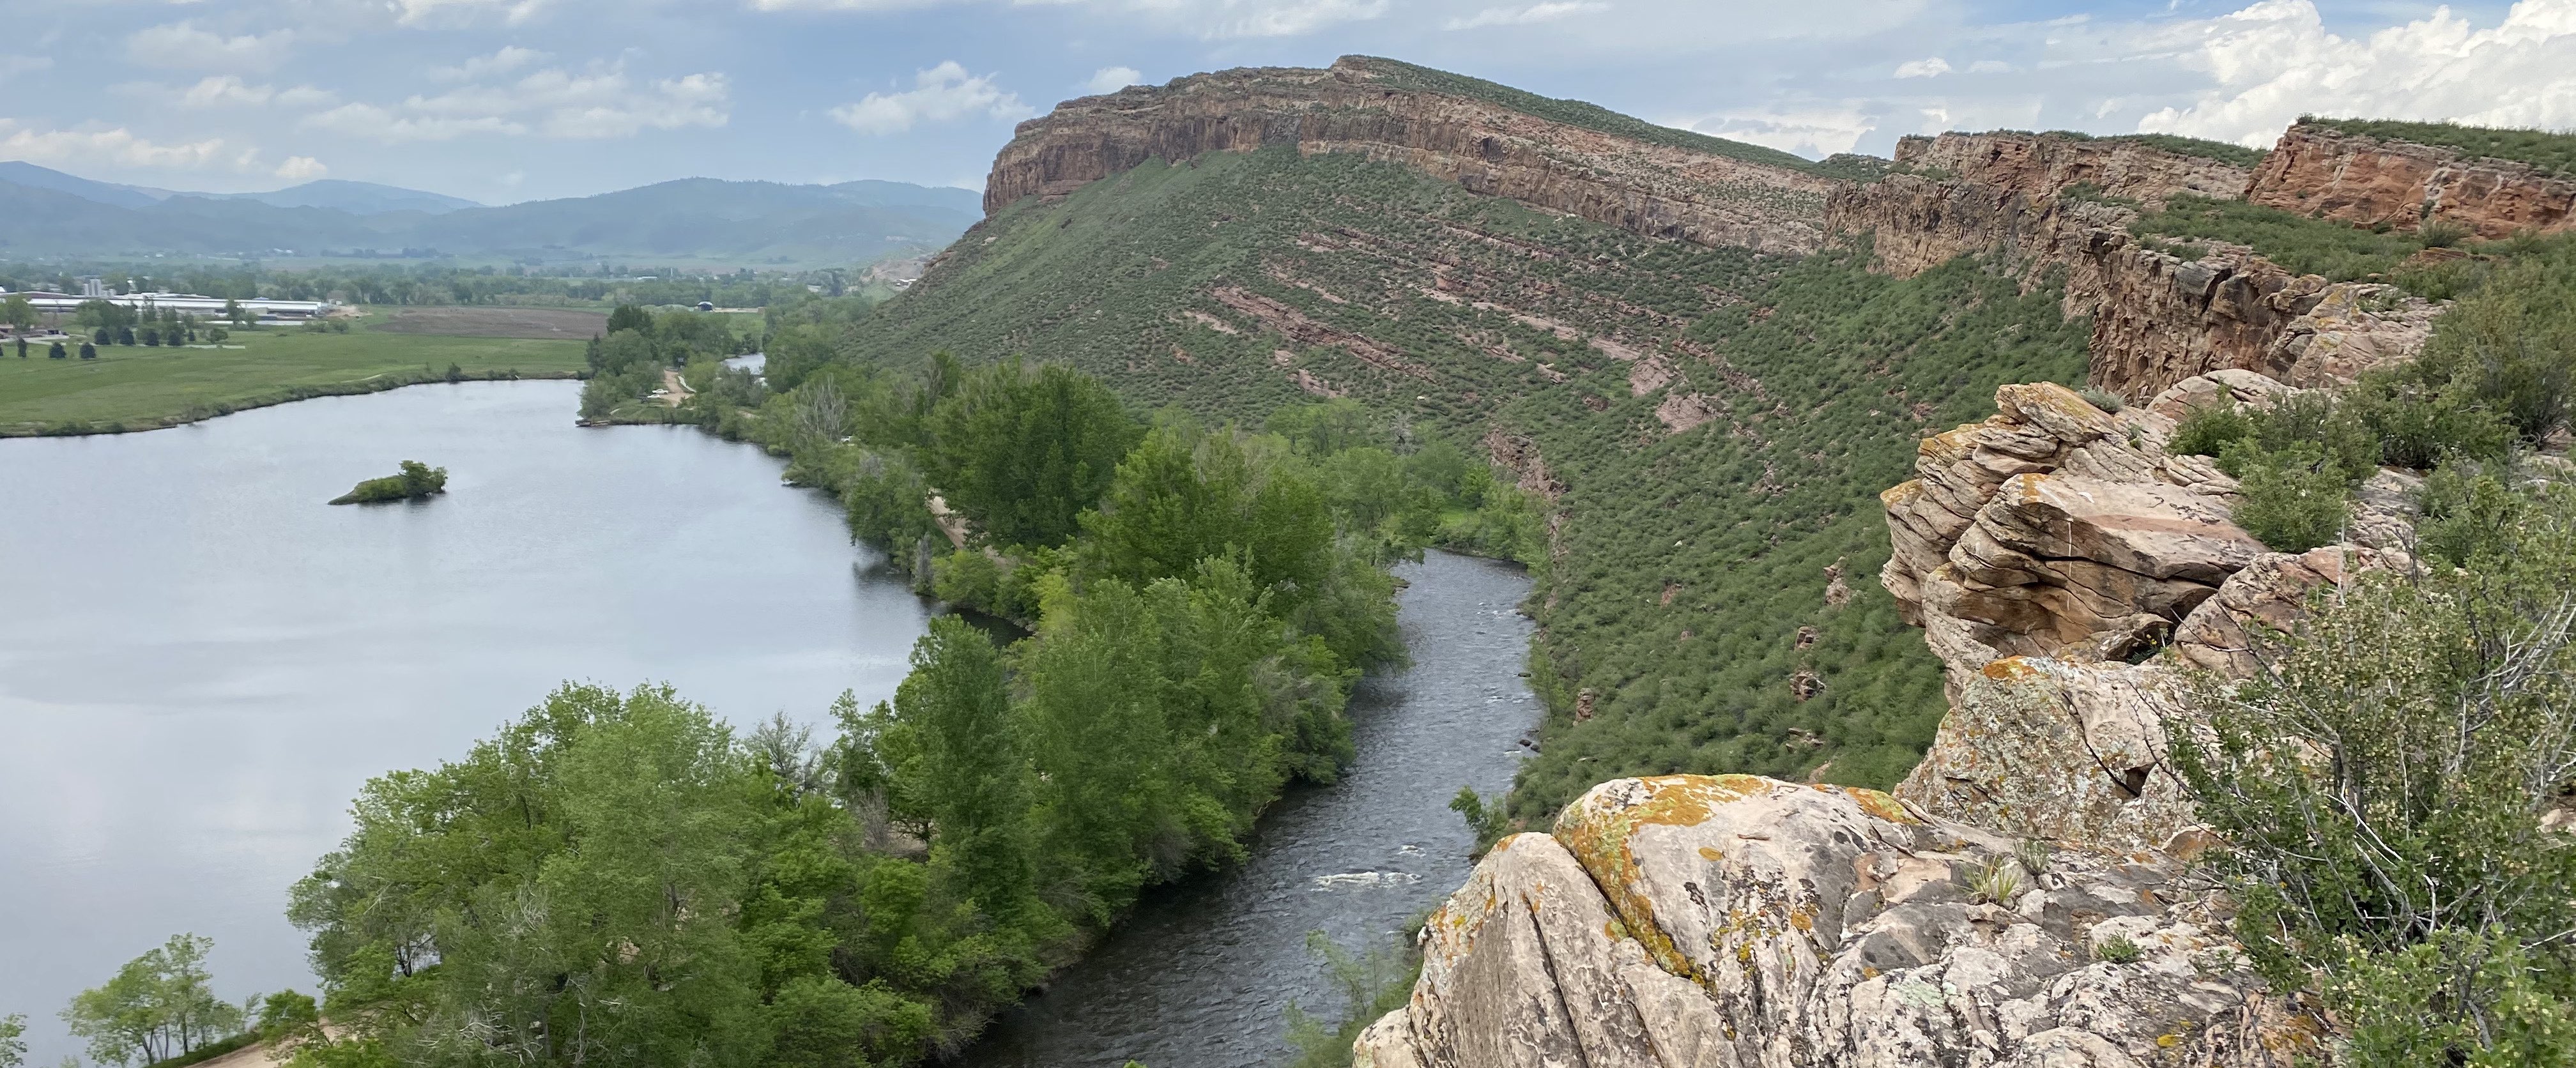 Watson Lake and Poudre Rive as viewed from Watson Dome